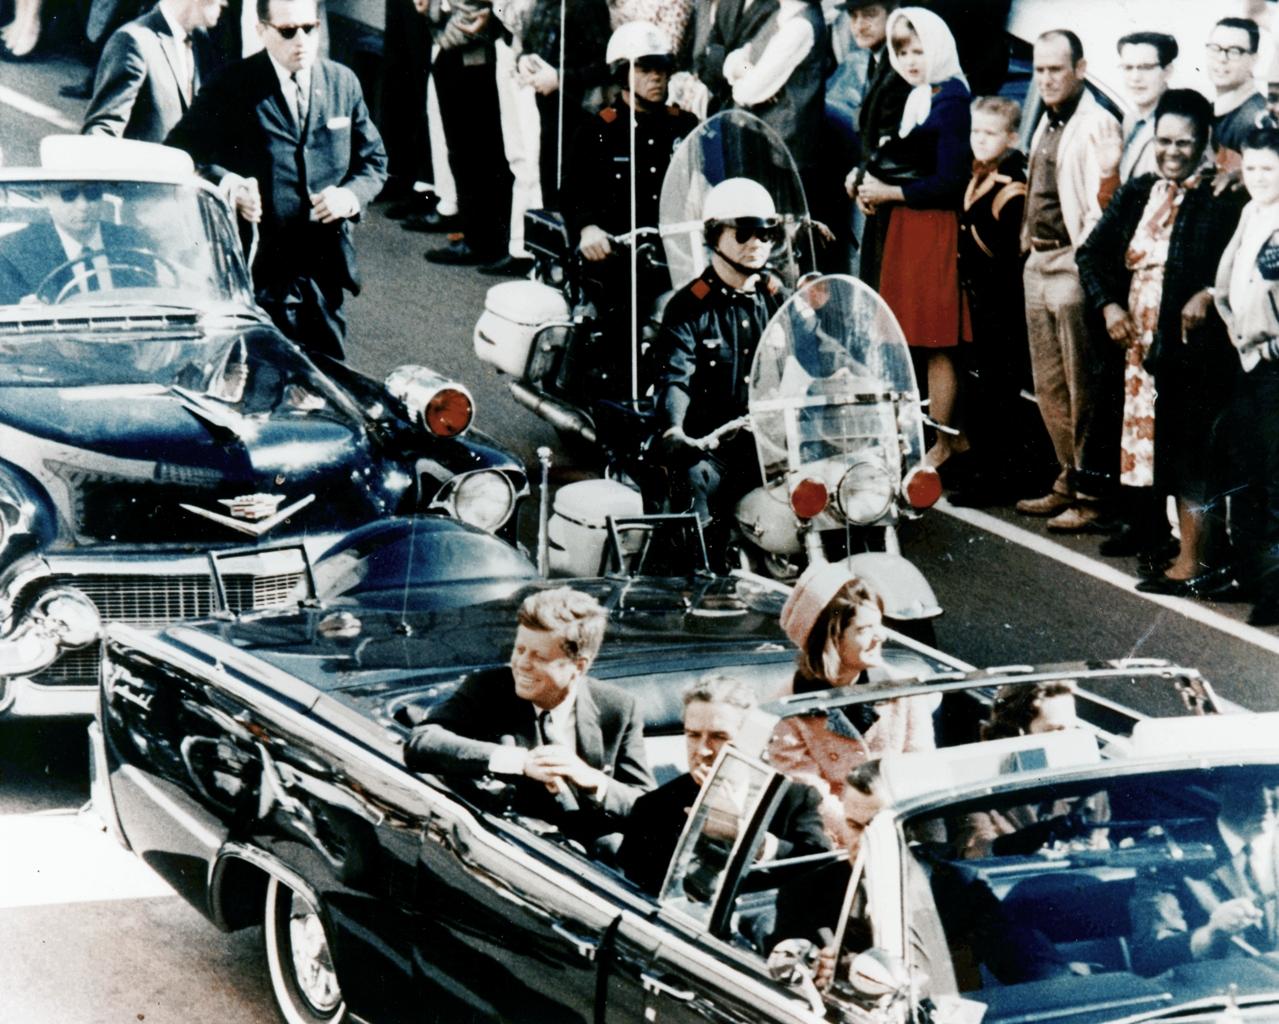 The Enduring Questions Surrounding the Assassination of JFK | The 